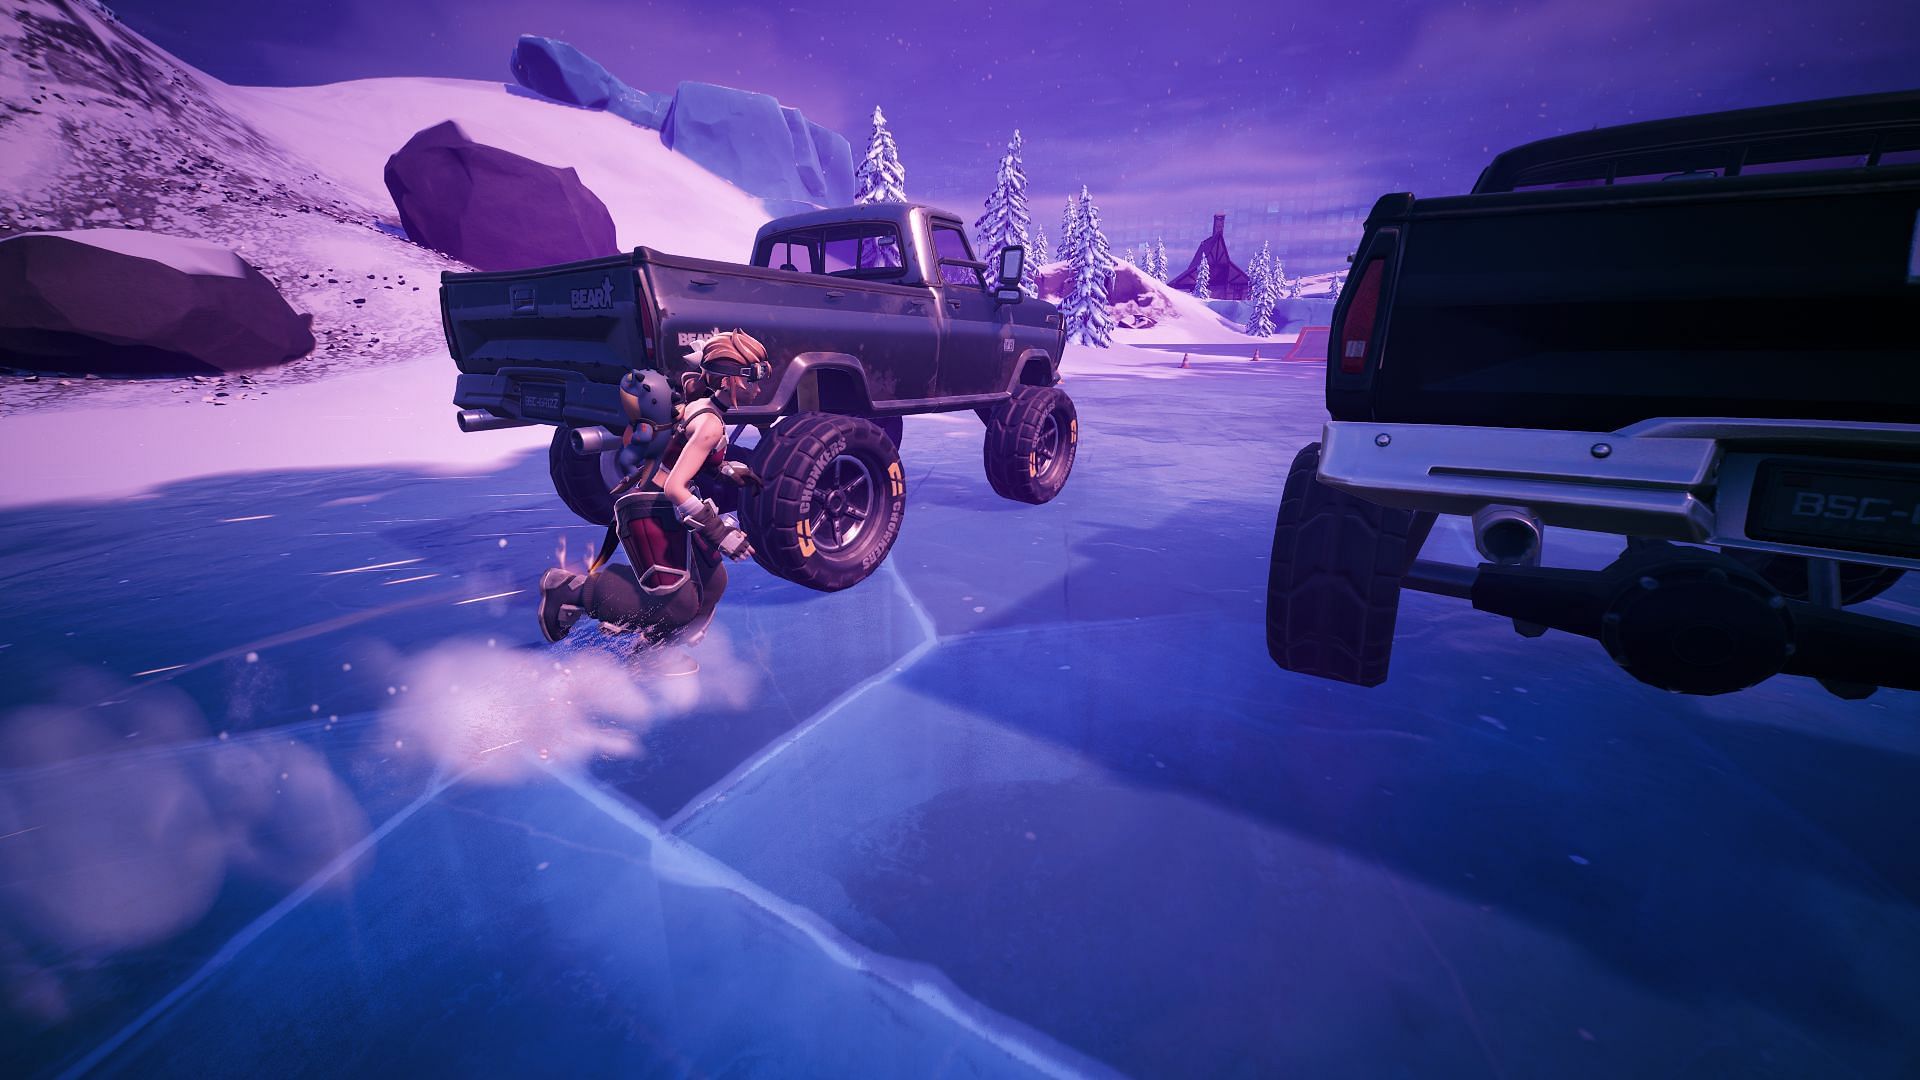 Bears are sturdy land vehicles (Image via Epic Games/Fortnite)